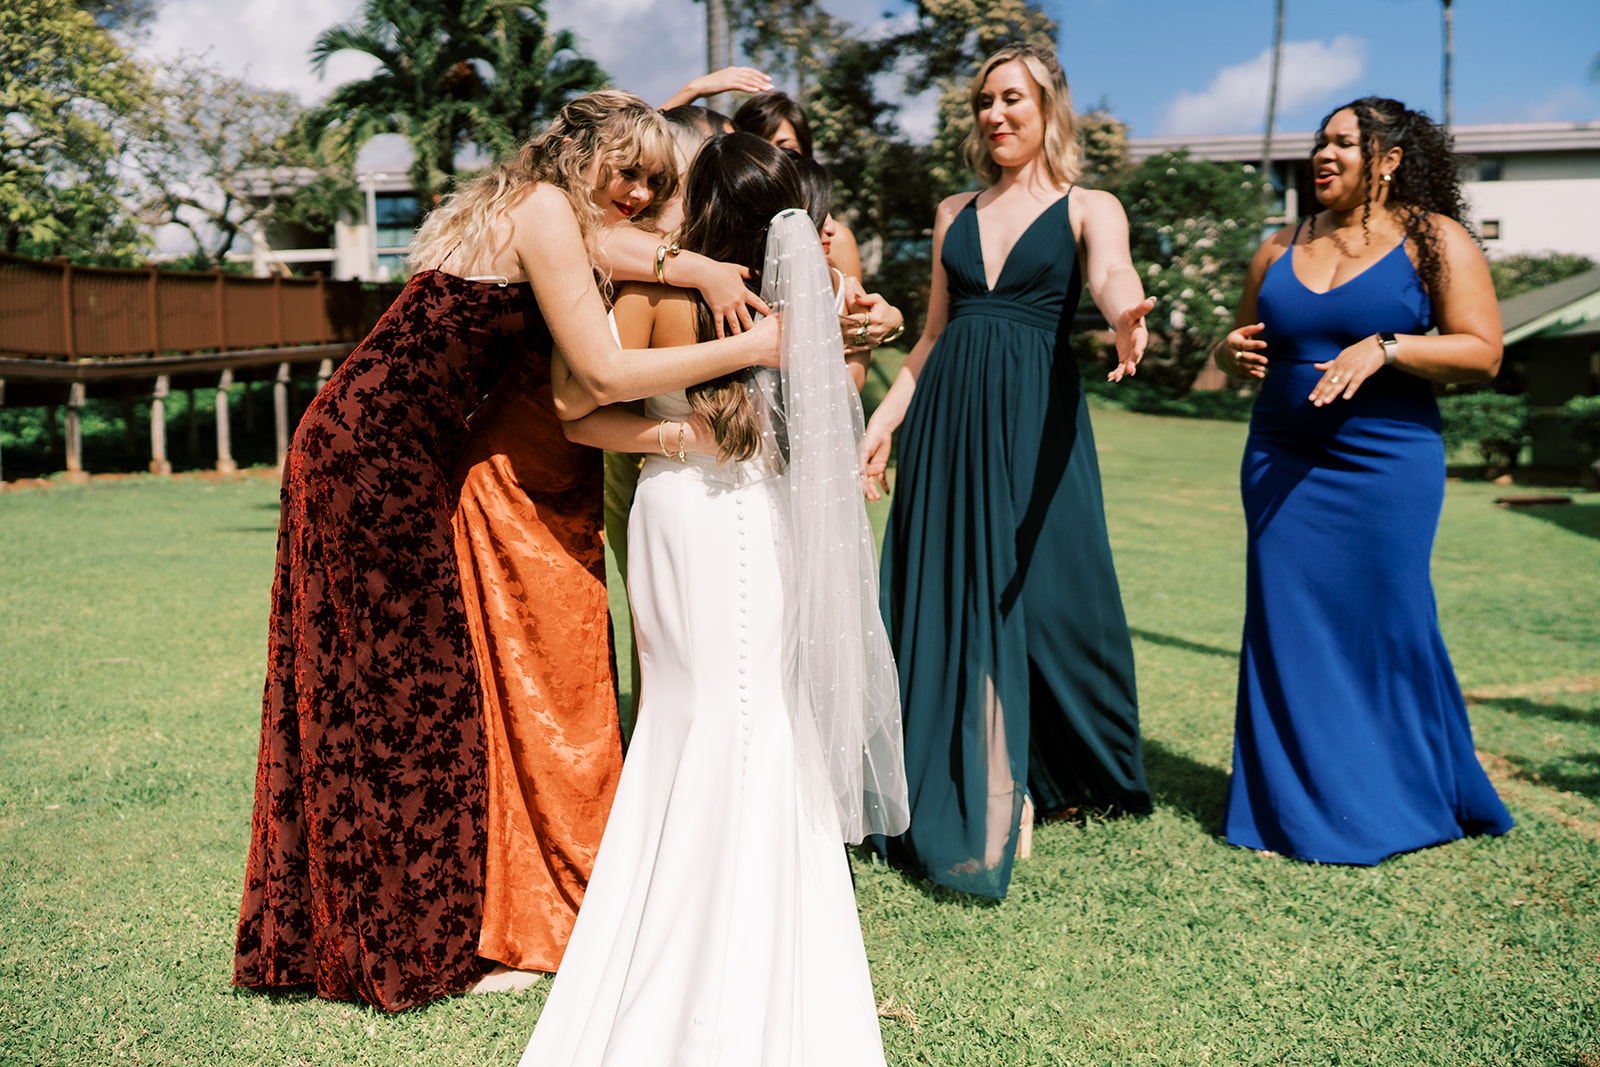 Two women embracing a bride while two other guests look on, at an outdoor Hawaiian wedding in Kauai